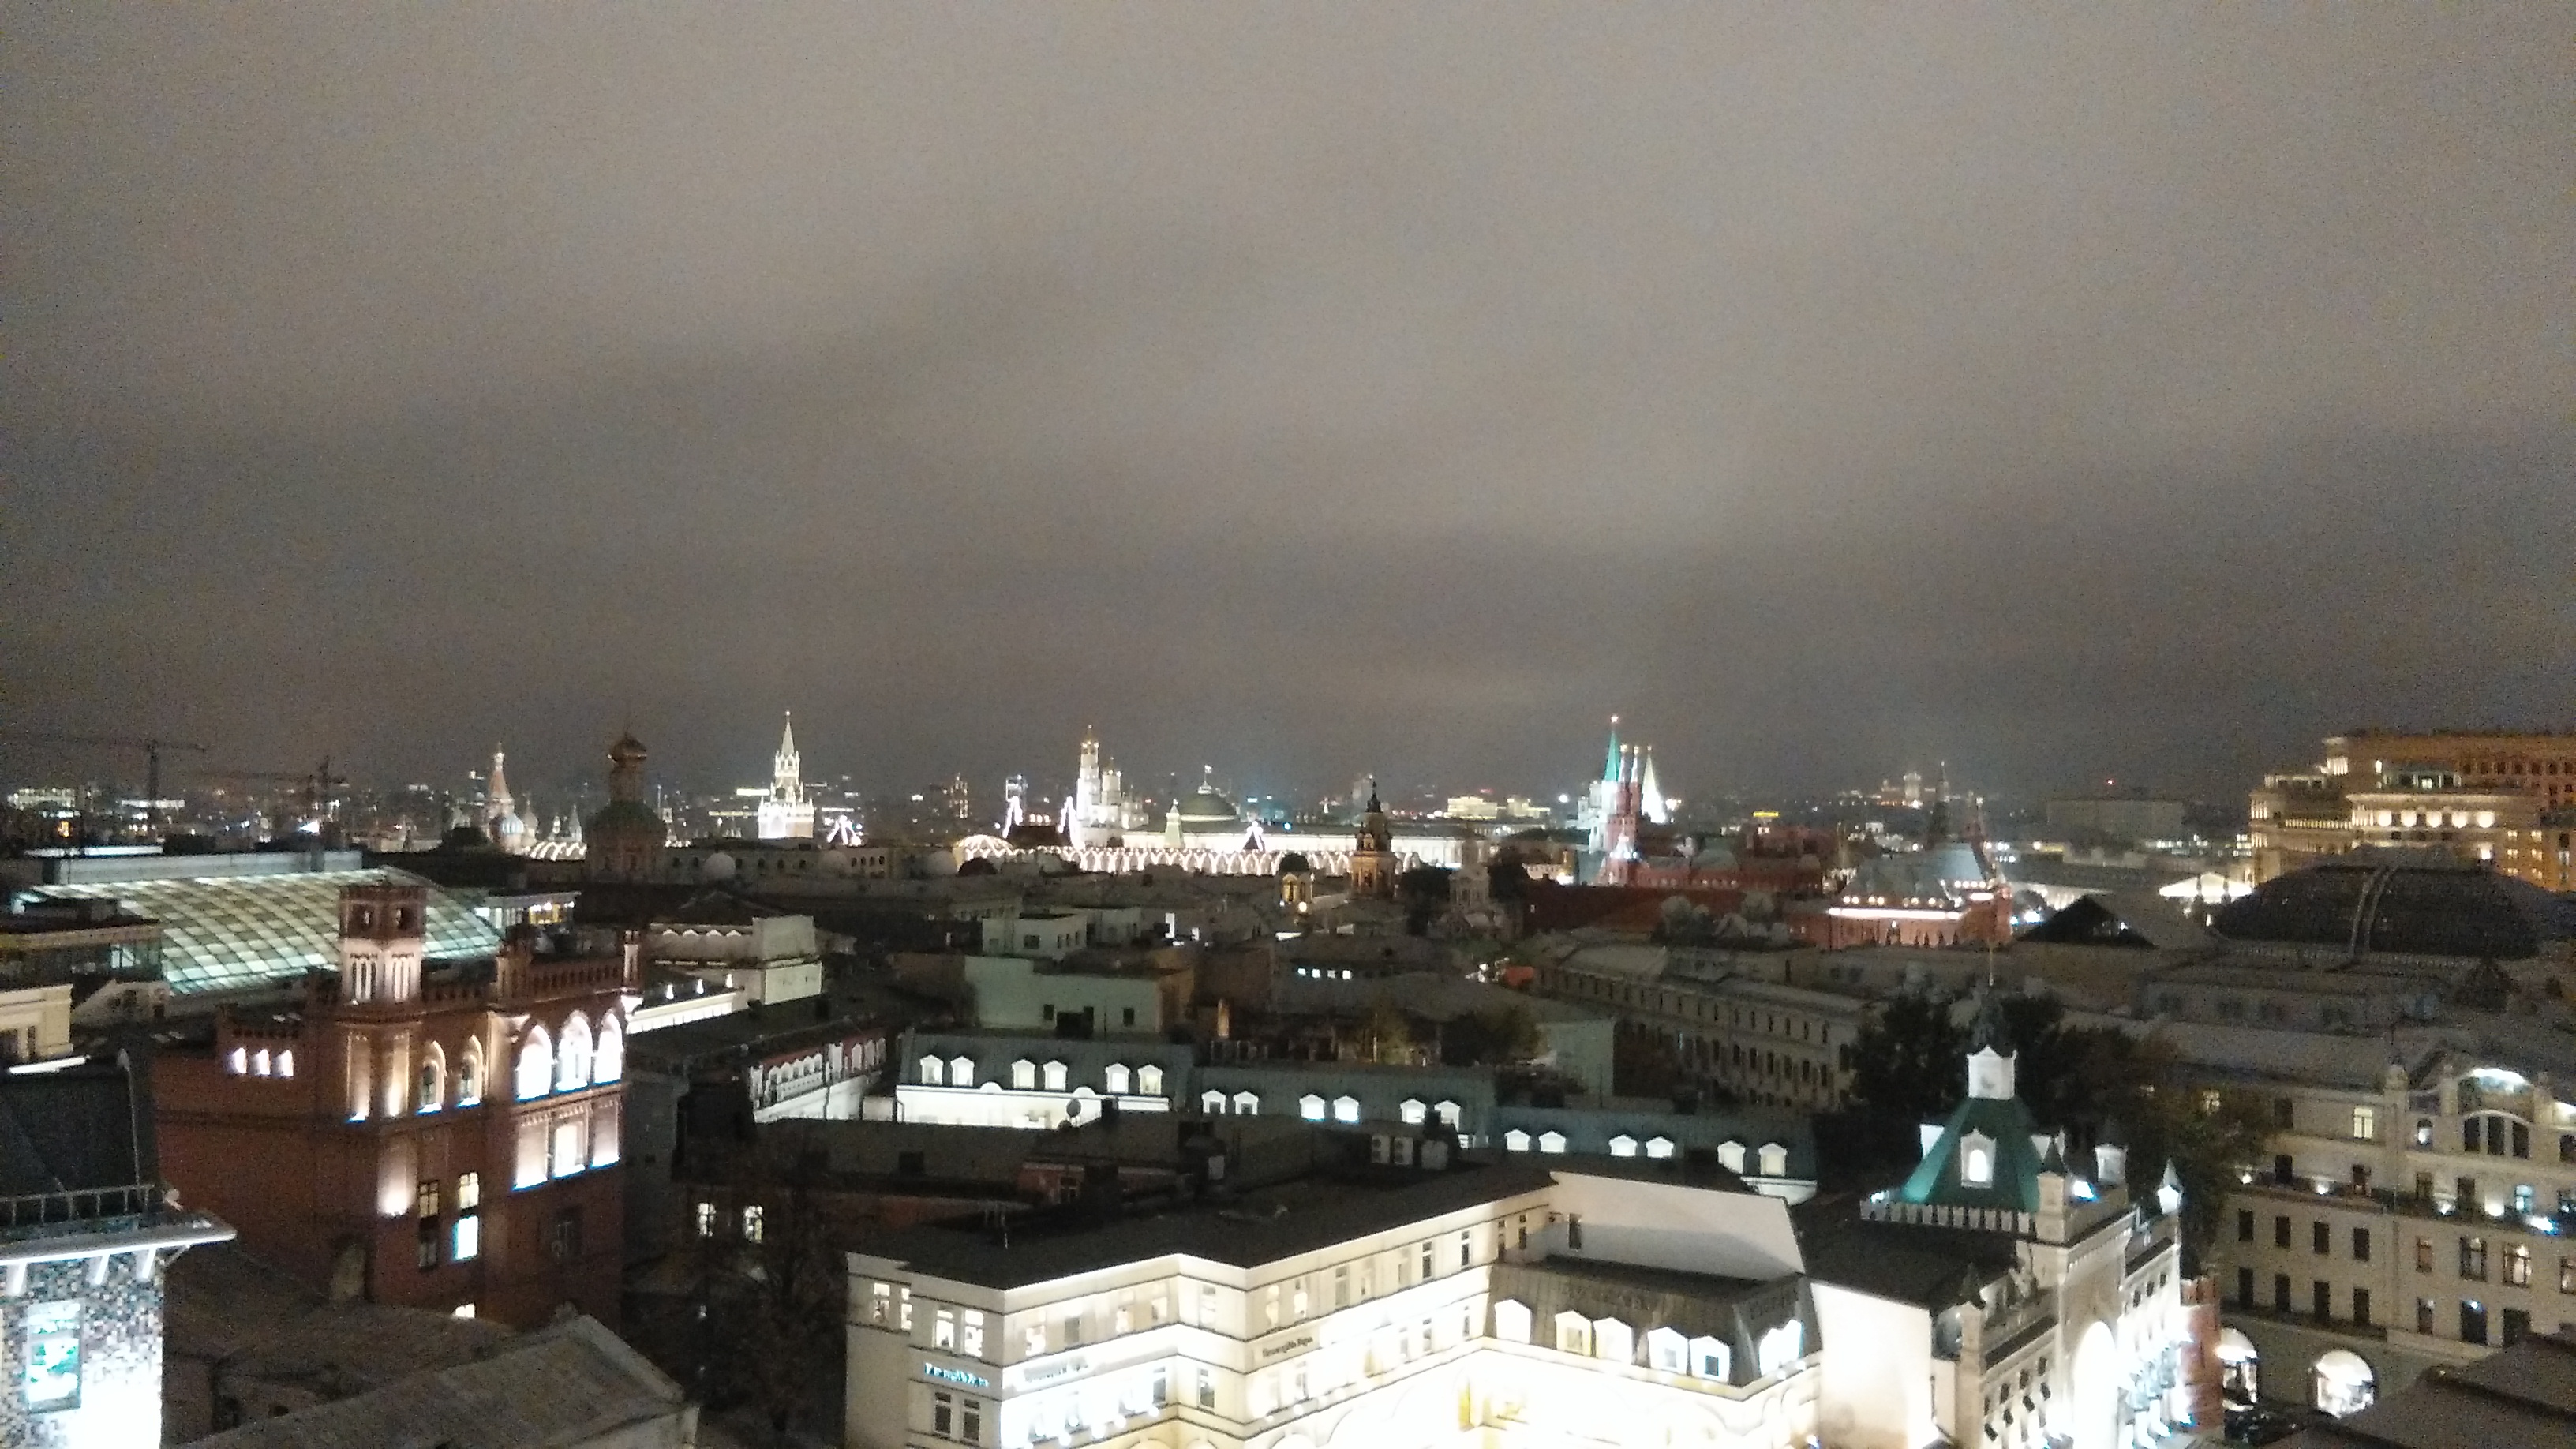 Moscow ar night - Kremlin in the distance